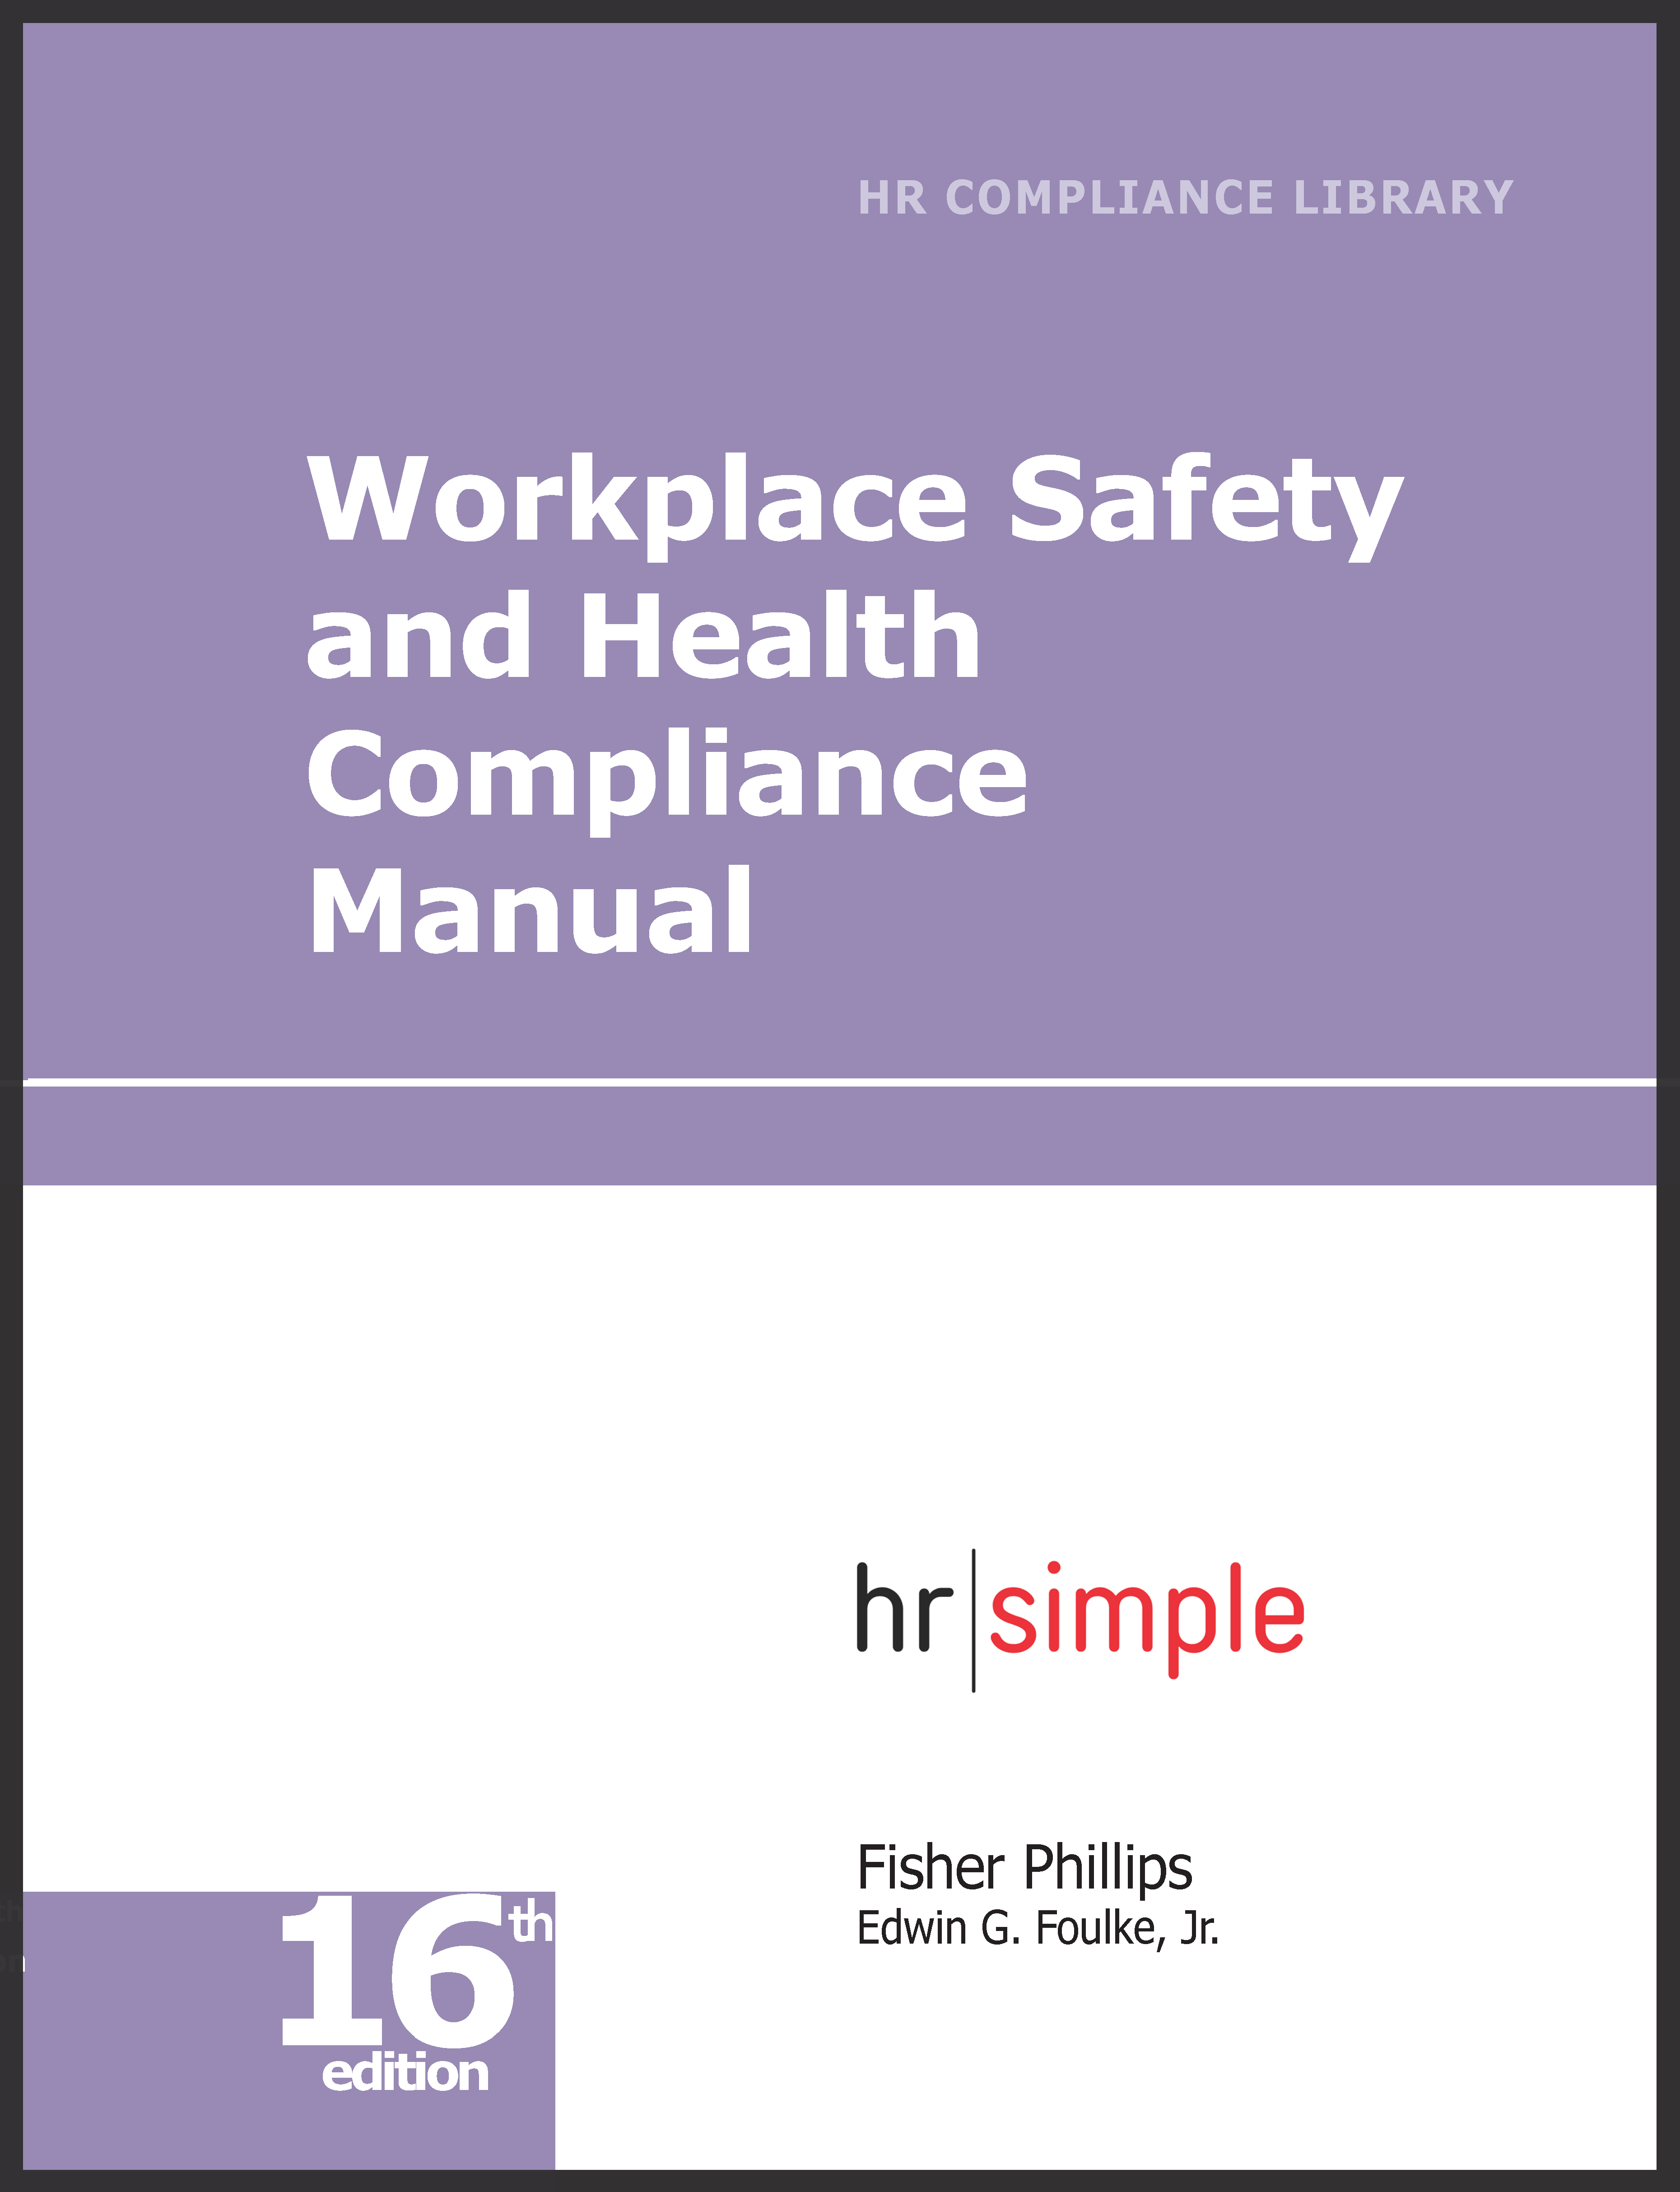 Workplace Safety and Health—Online Only employment law image, remote work, labor laws, employment laws, right to work, order of protection, minimum wage